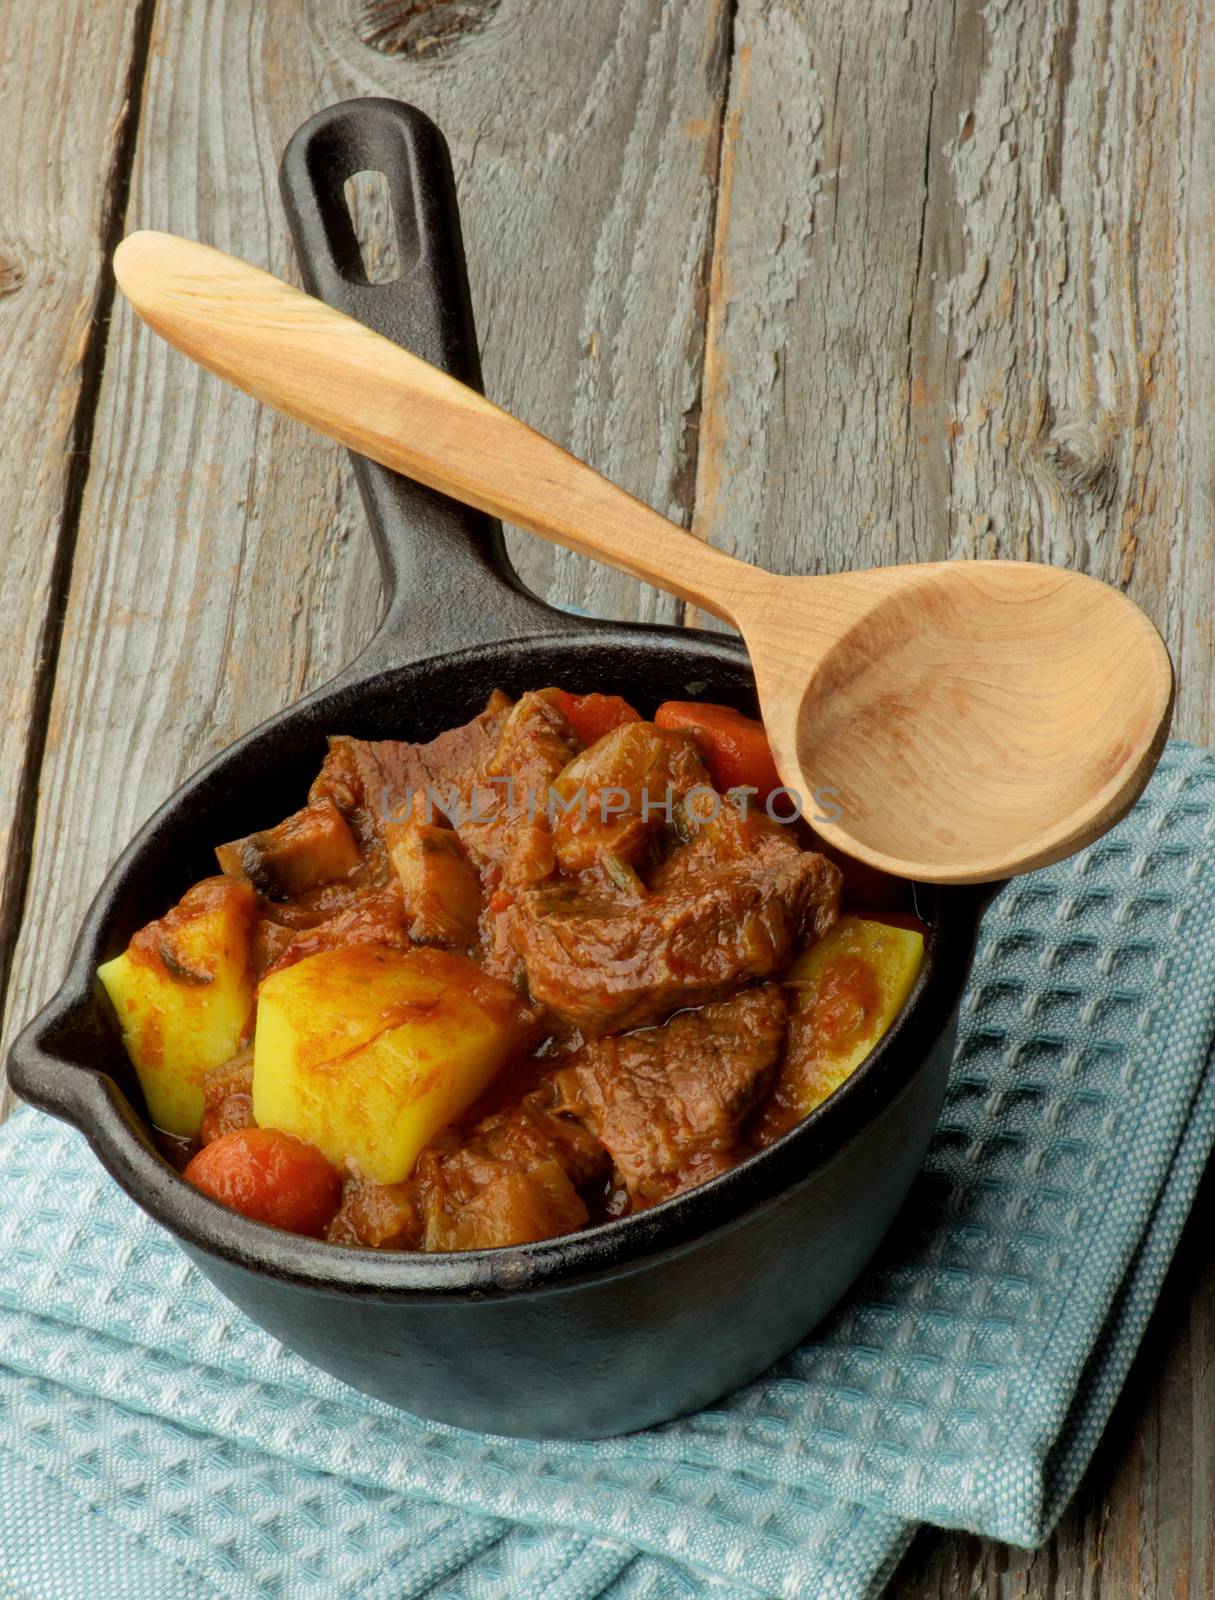 Homemade Beef Stew with Carrots, Potatoes, Celery and Leek in Cast Iron on Blue Napkin with Wooden Spoon closeup on Wooden background